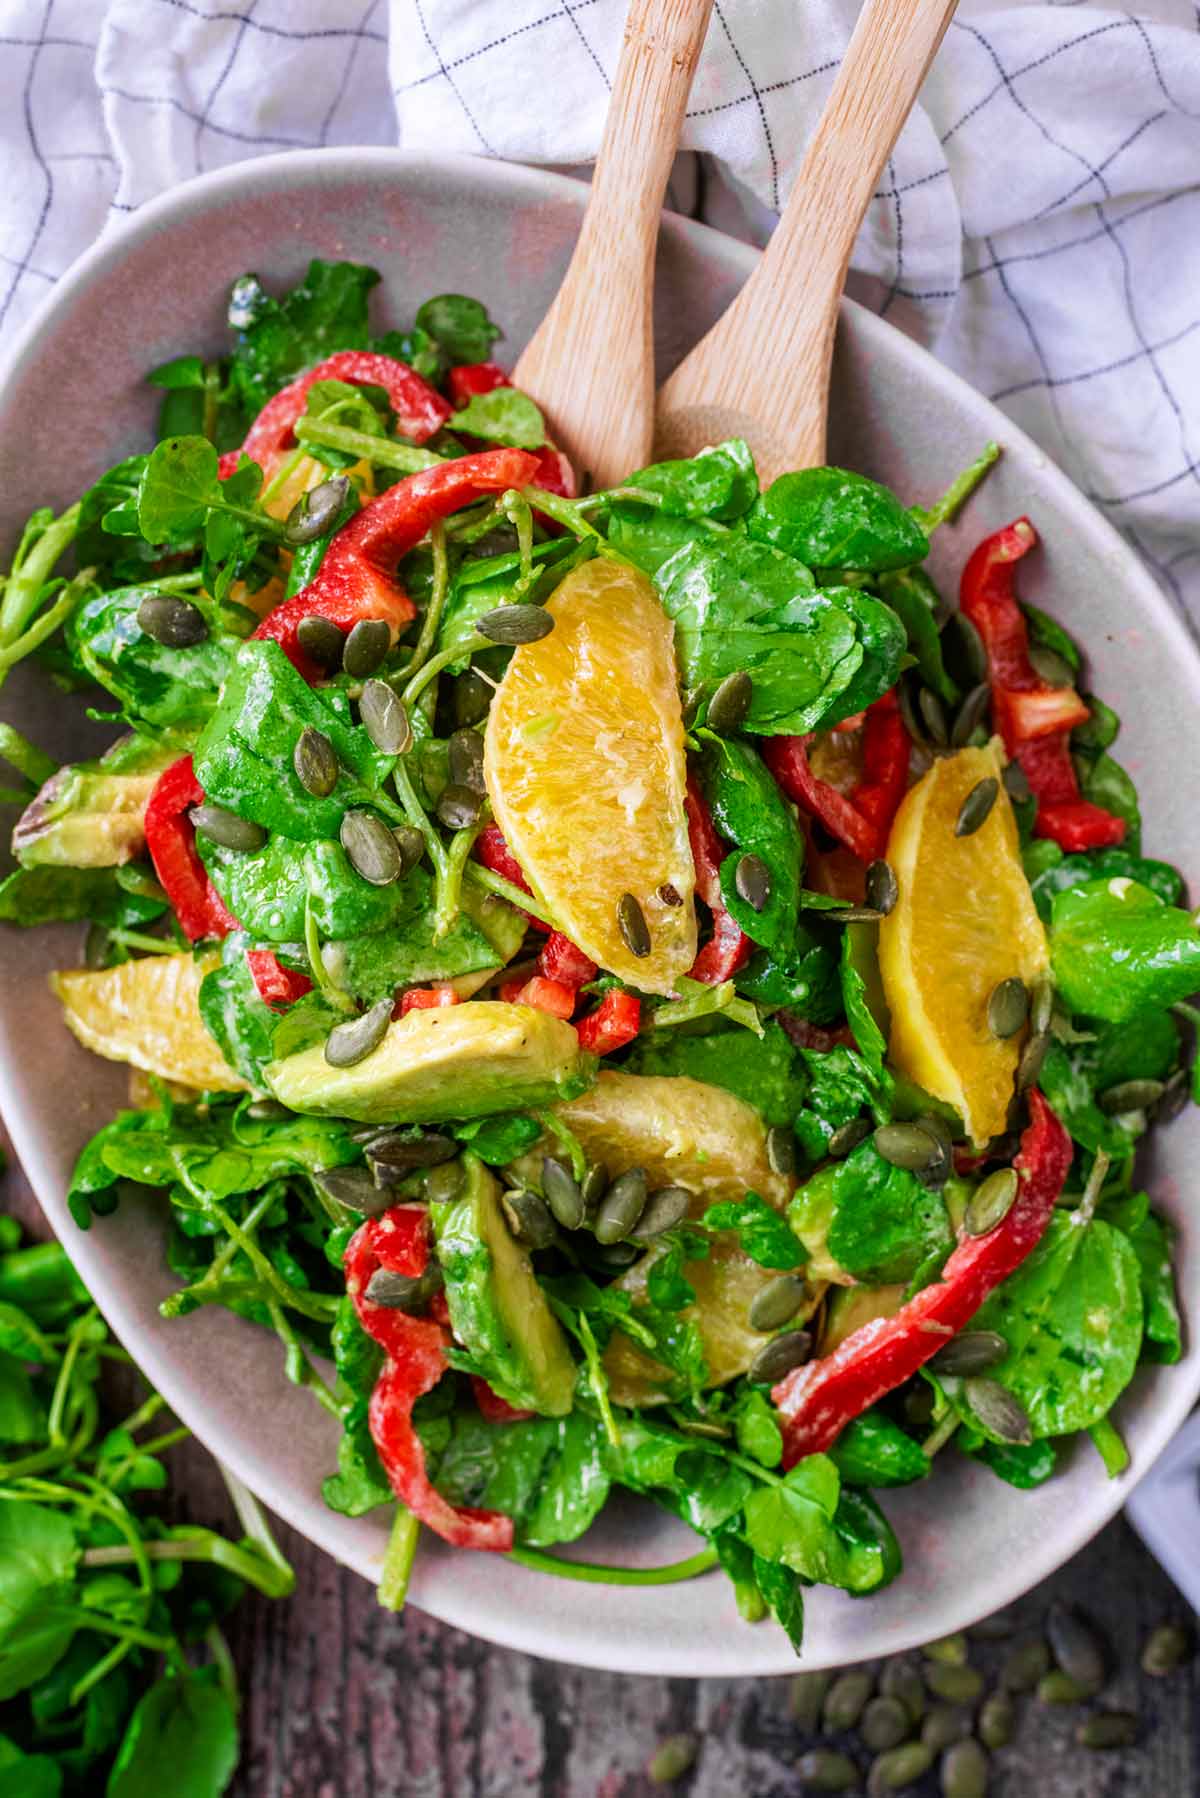 A salad of green leaves, red pepper, orange and avocado.